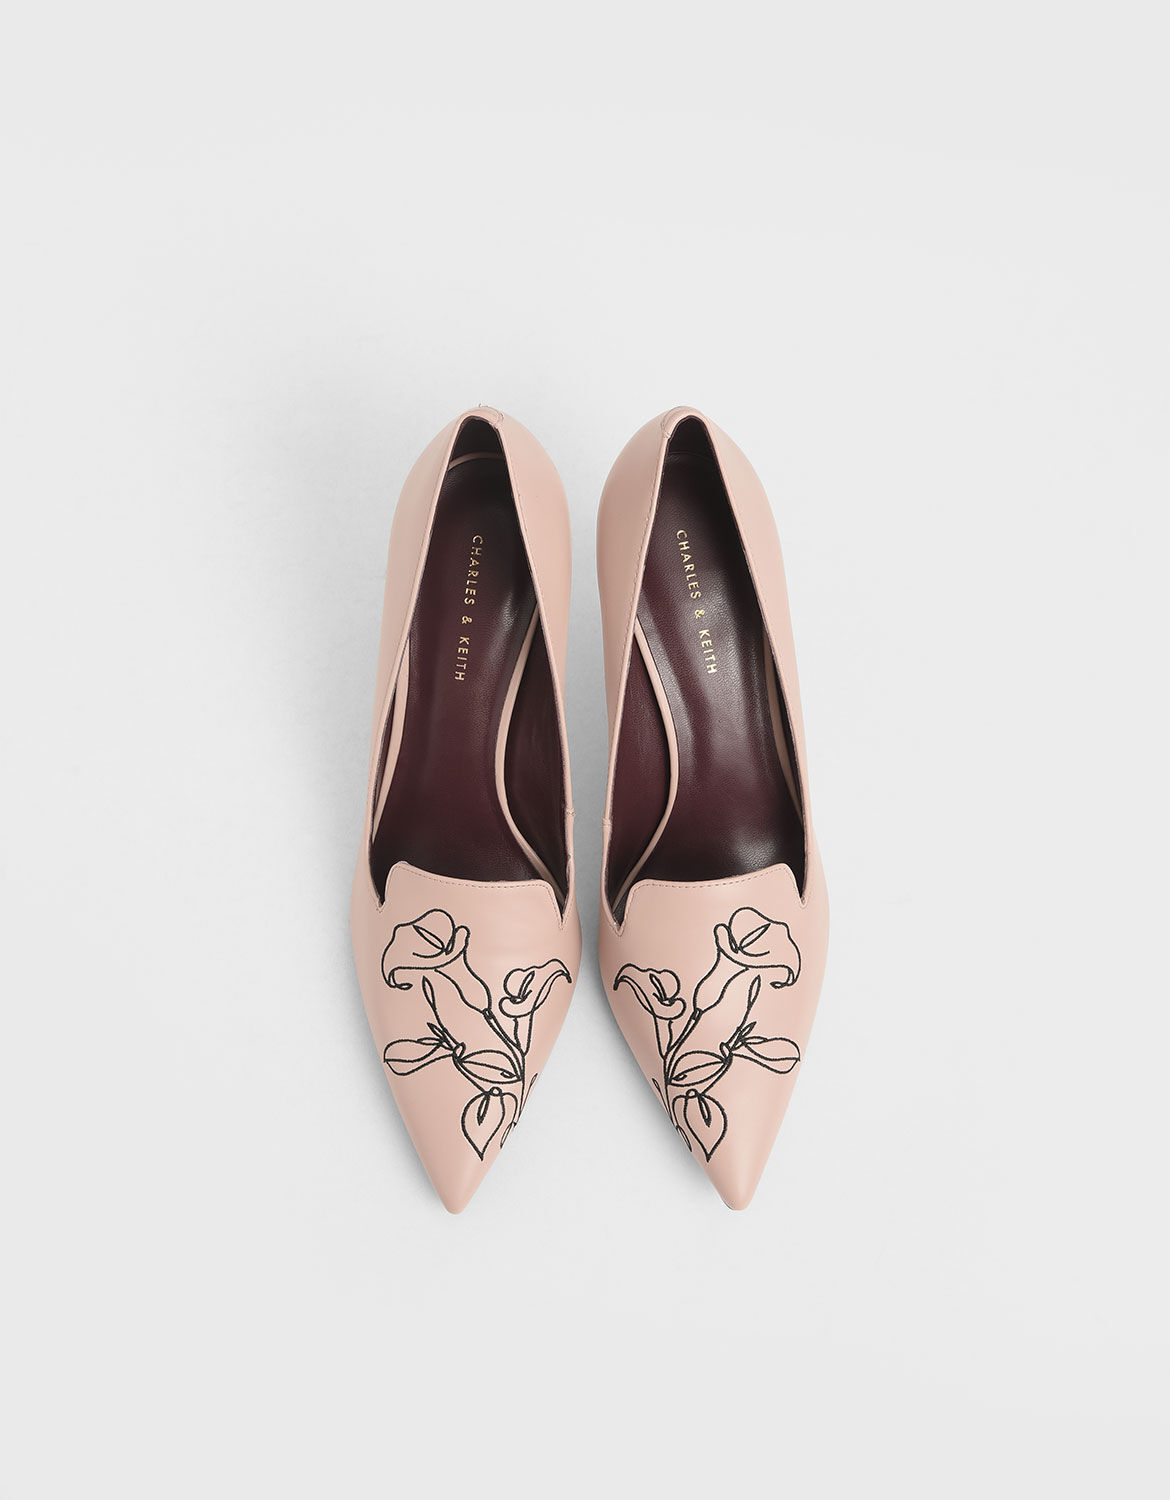 embroidered pumps shoes